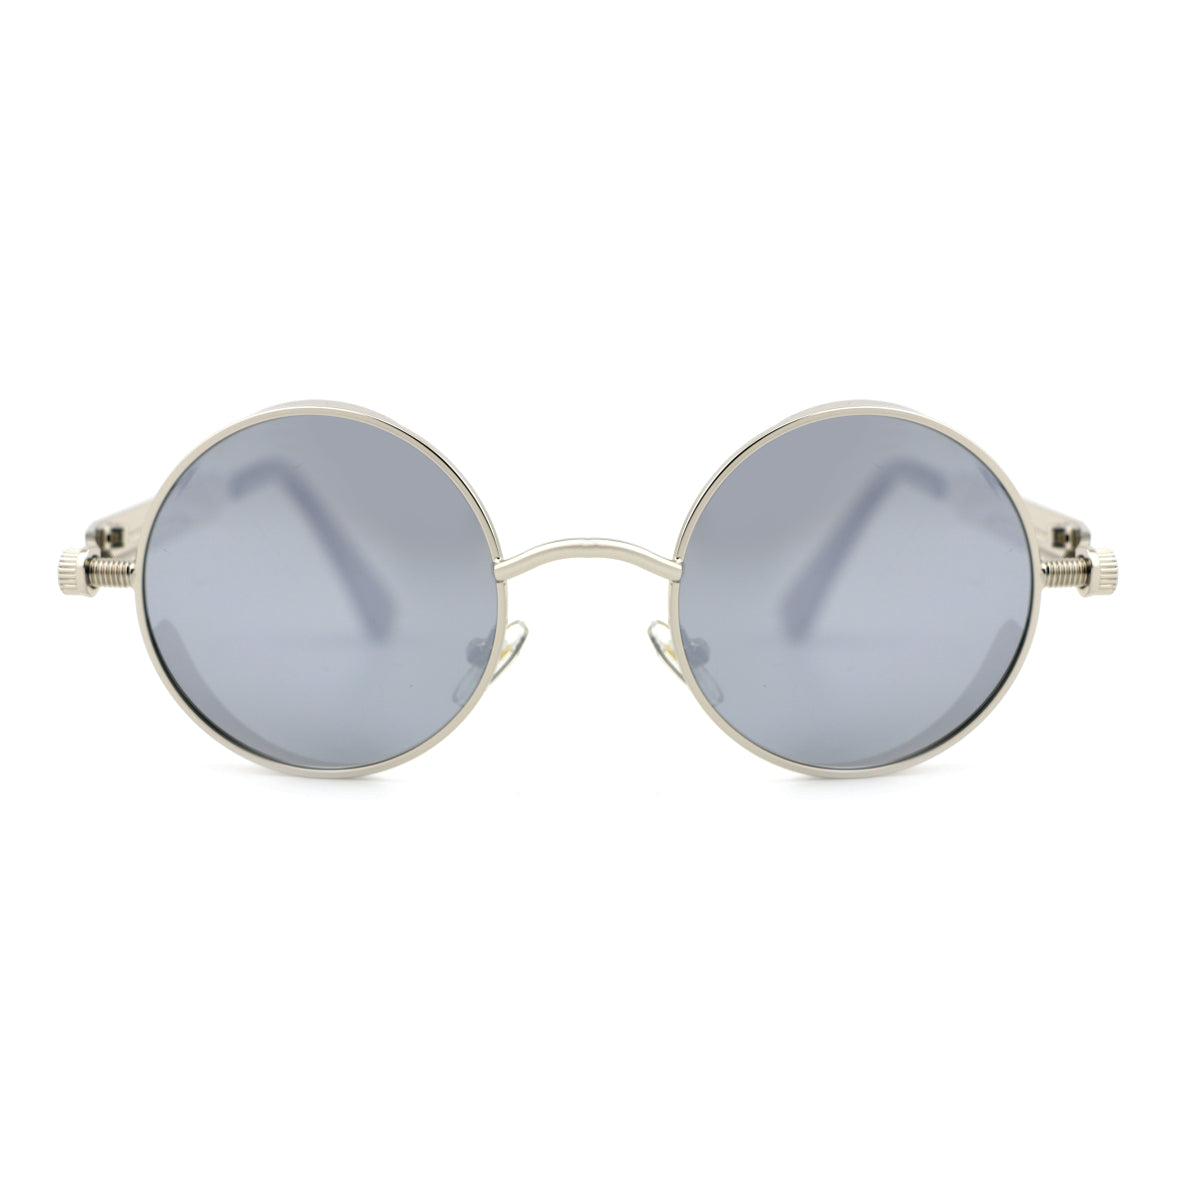 Steampunk HIPSTER SILVER Round Glasses Polarised Sunglasses